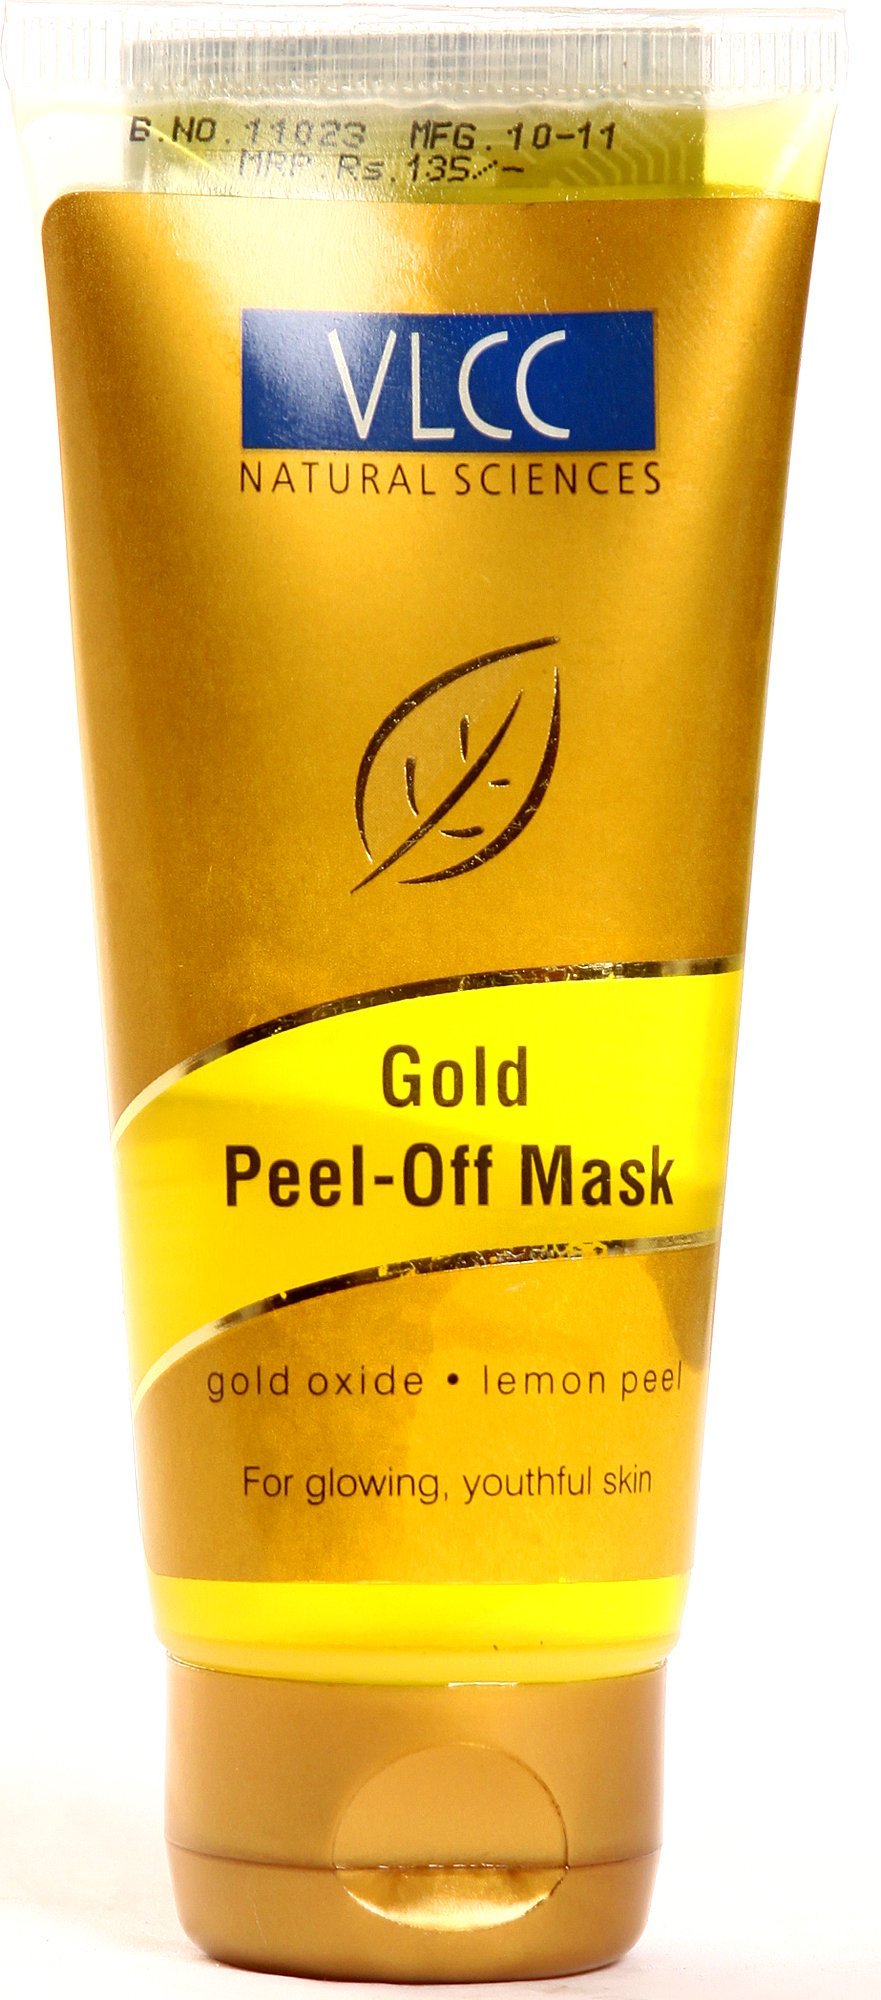 VLCC Gold Peel-Off Mask - book cover